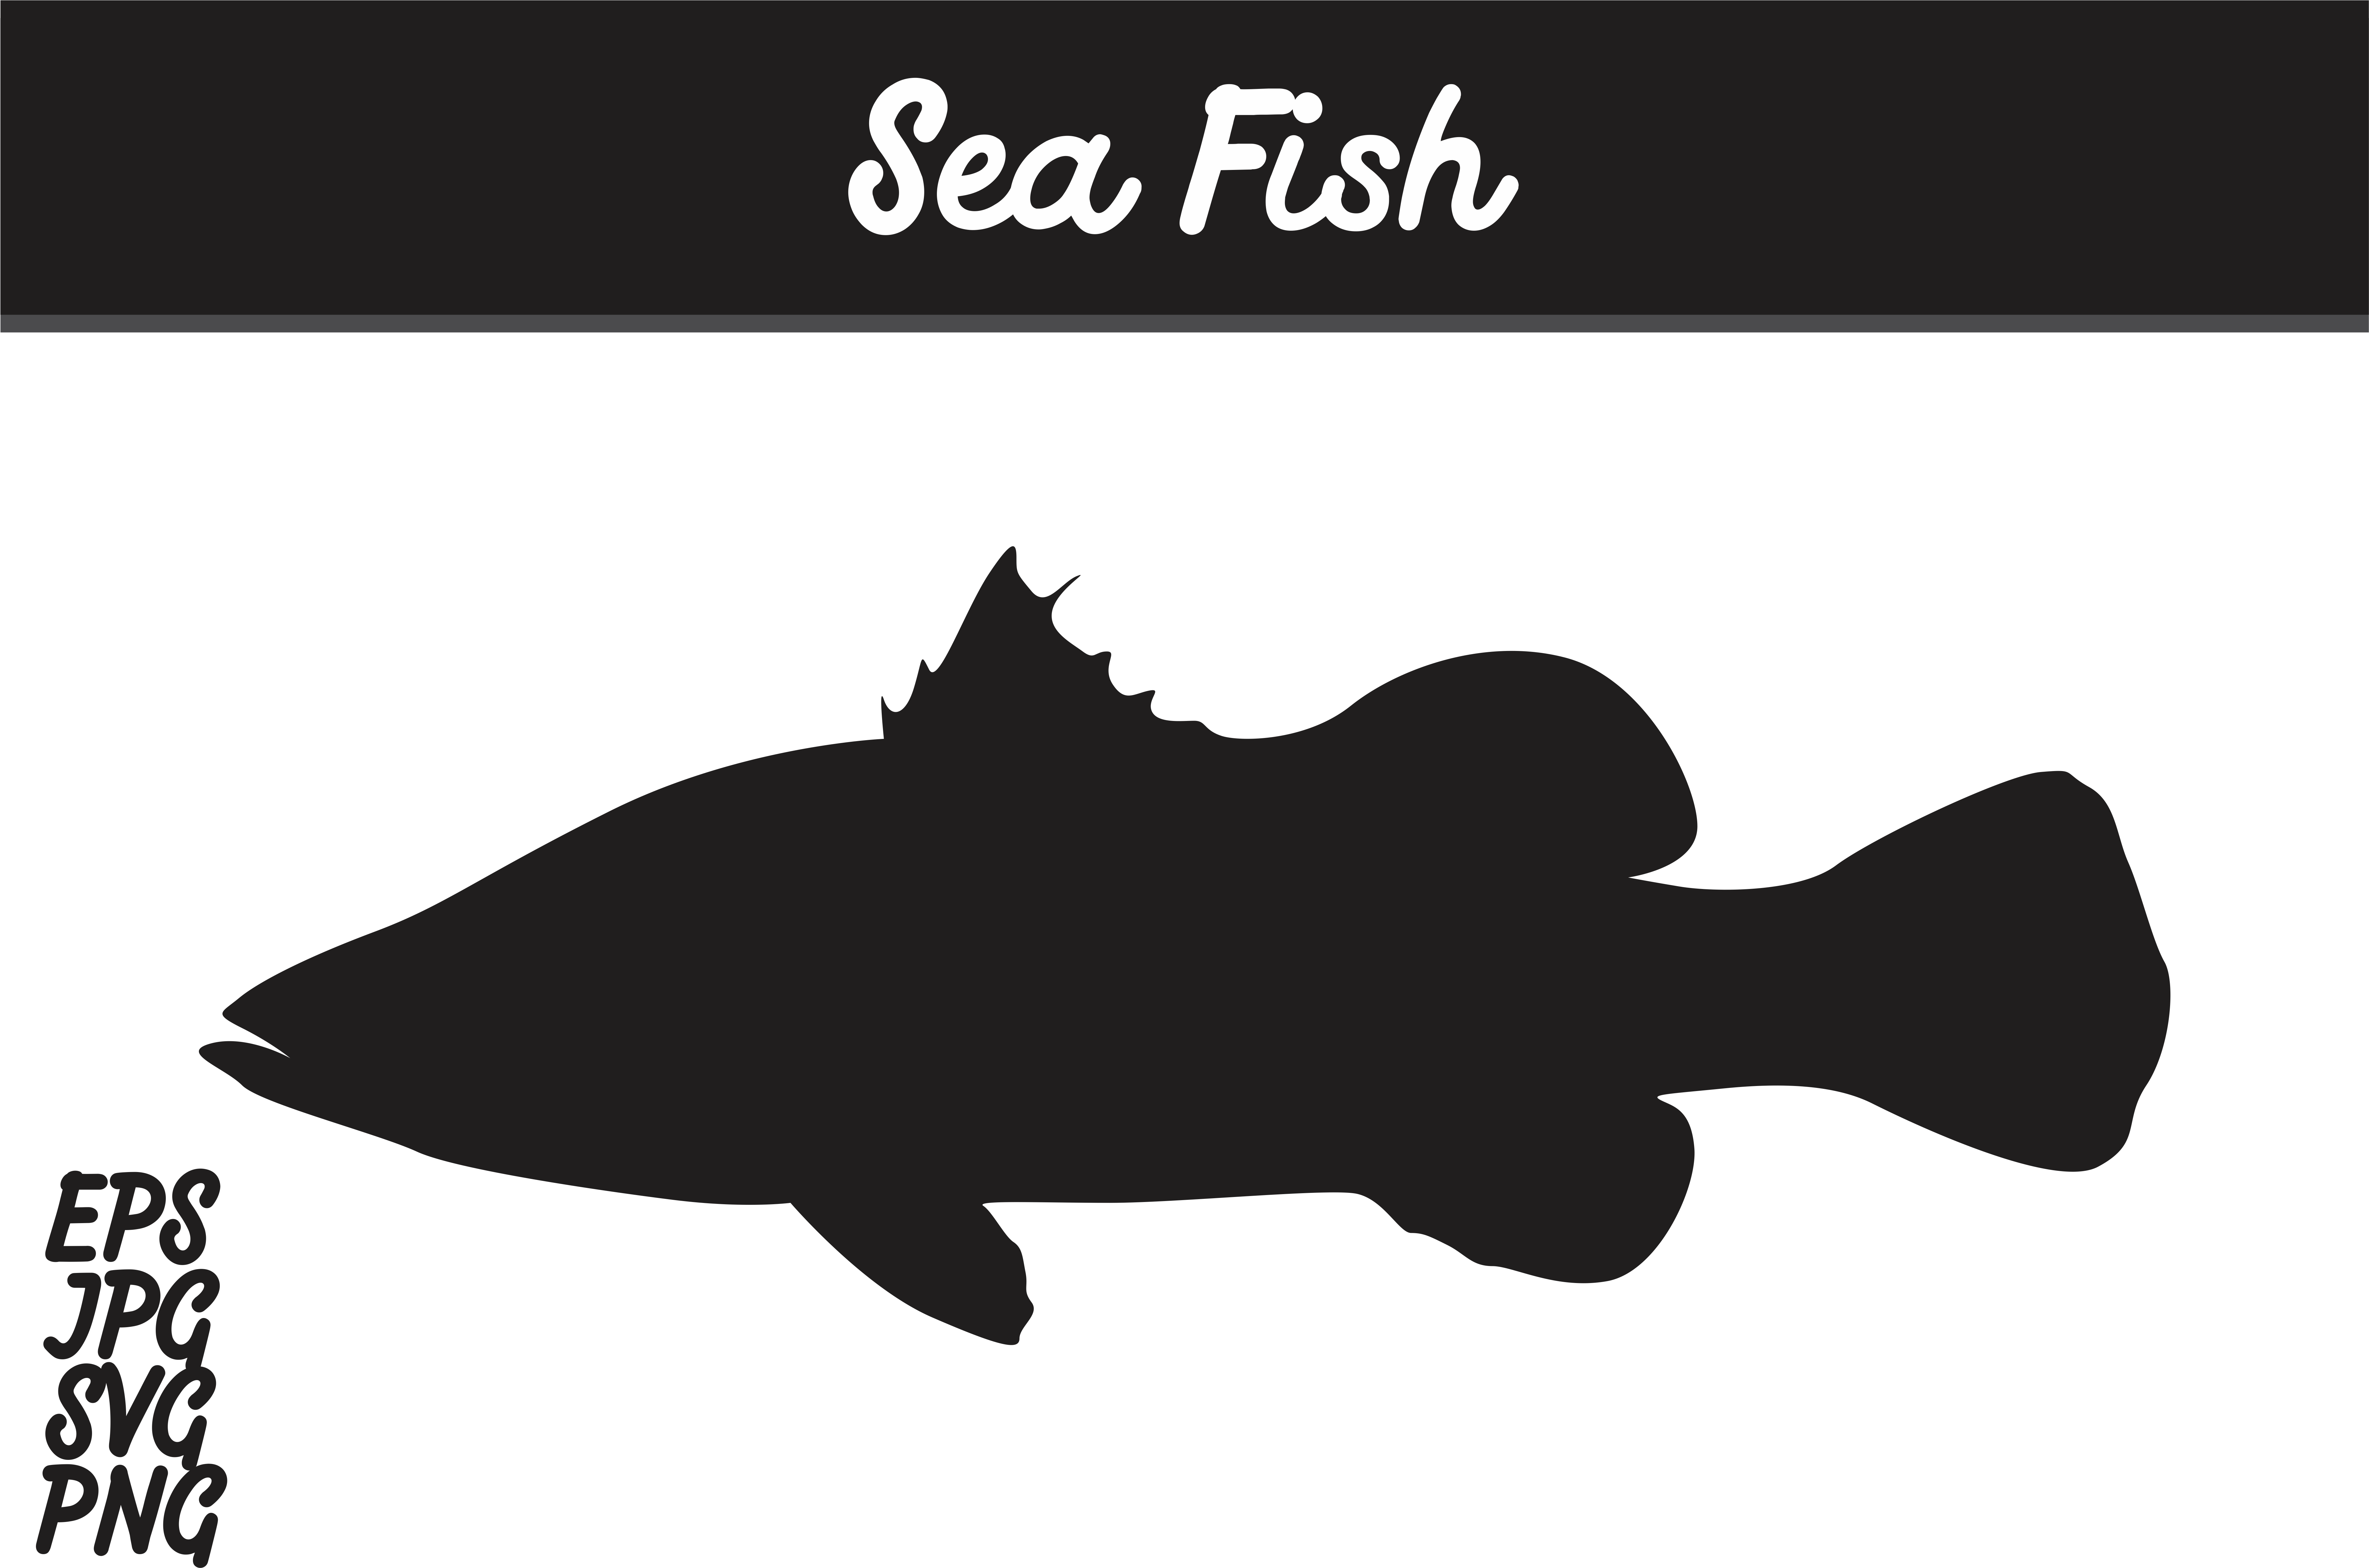 Download Sea Fish Silhouette Svg Vector Image Graphic By Arief Bony Fish Clipart Large Size Png Image Pikpng